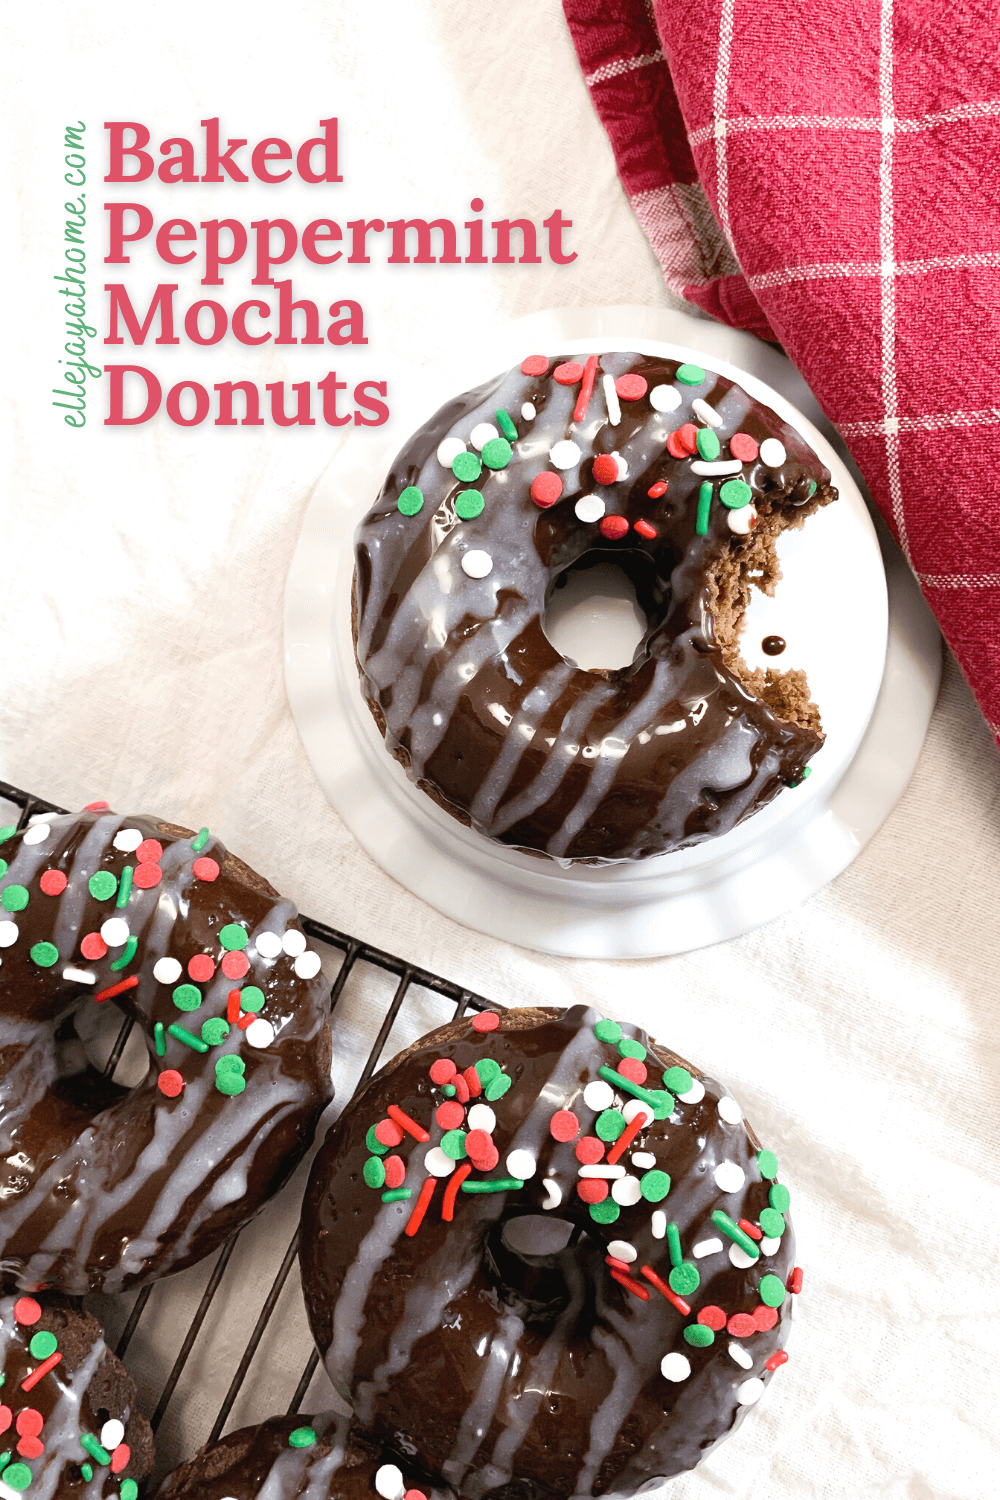 Peppermint Mocha Donuts that You Need in Your Face Right Now